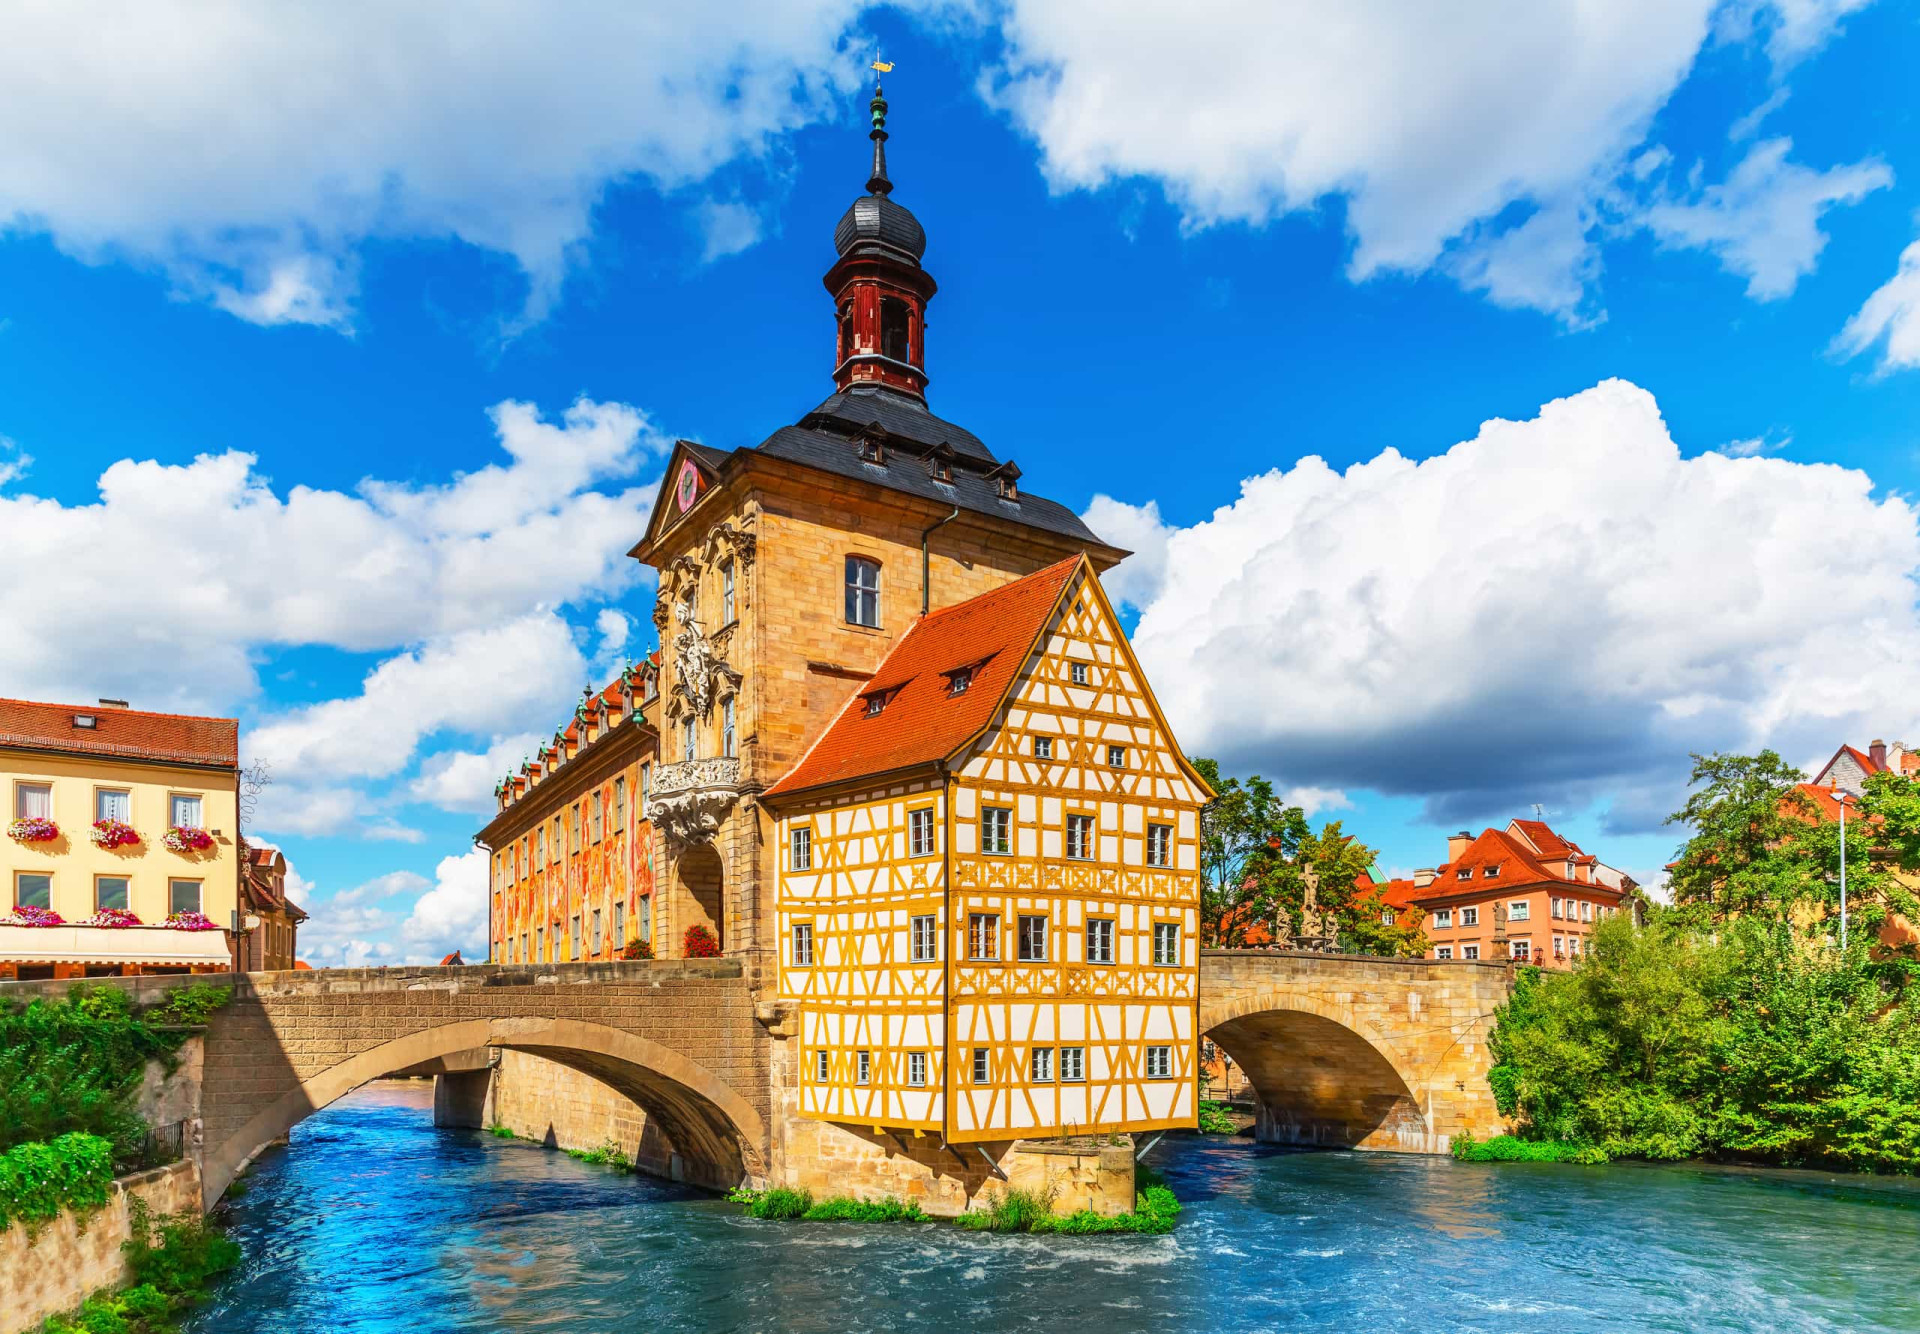 <p>Picture-perfect Bamberg in Upper Franconia is another destination celebrated for its architecture. The Old Town is a UNESCO World Heritage Site and enclosed by Europe's largest intact city wall. Preserved within are gems like its magnificent cathedral, consecrated in 1012.</p><p><a href="https://www.msn.com/en-us/community/channel/vid-7xx8mnucu55yw63we9va2gwr7uihbxwc68fxqp25x6tg4ftibpra?cvid=94631541bc0f4f89bfd59158d696ad7e">Follow us and access great exclusive content every day</a></p>